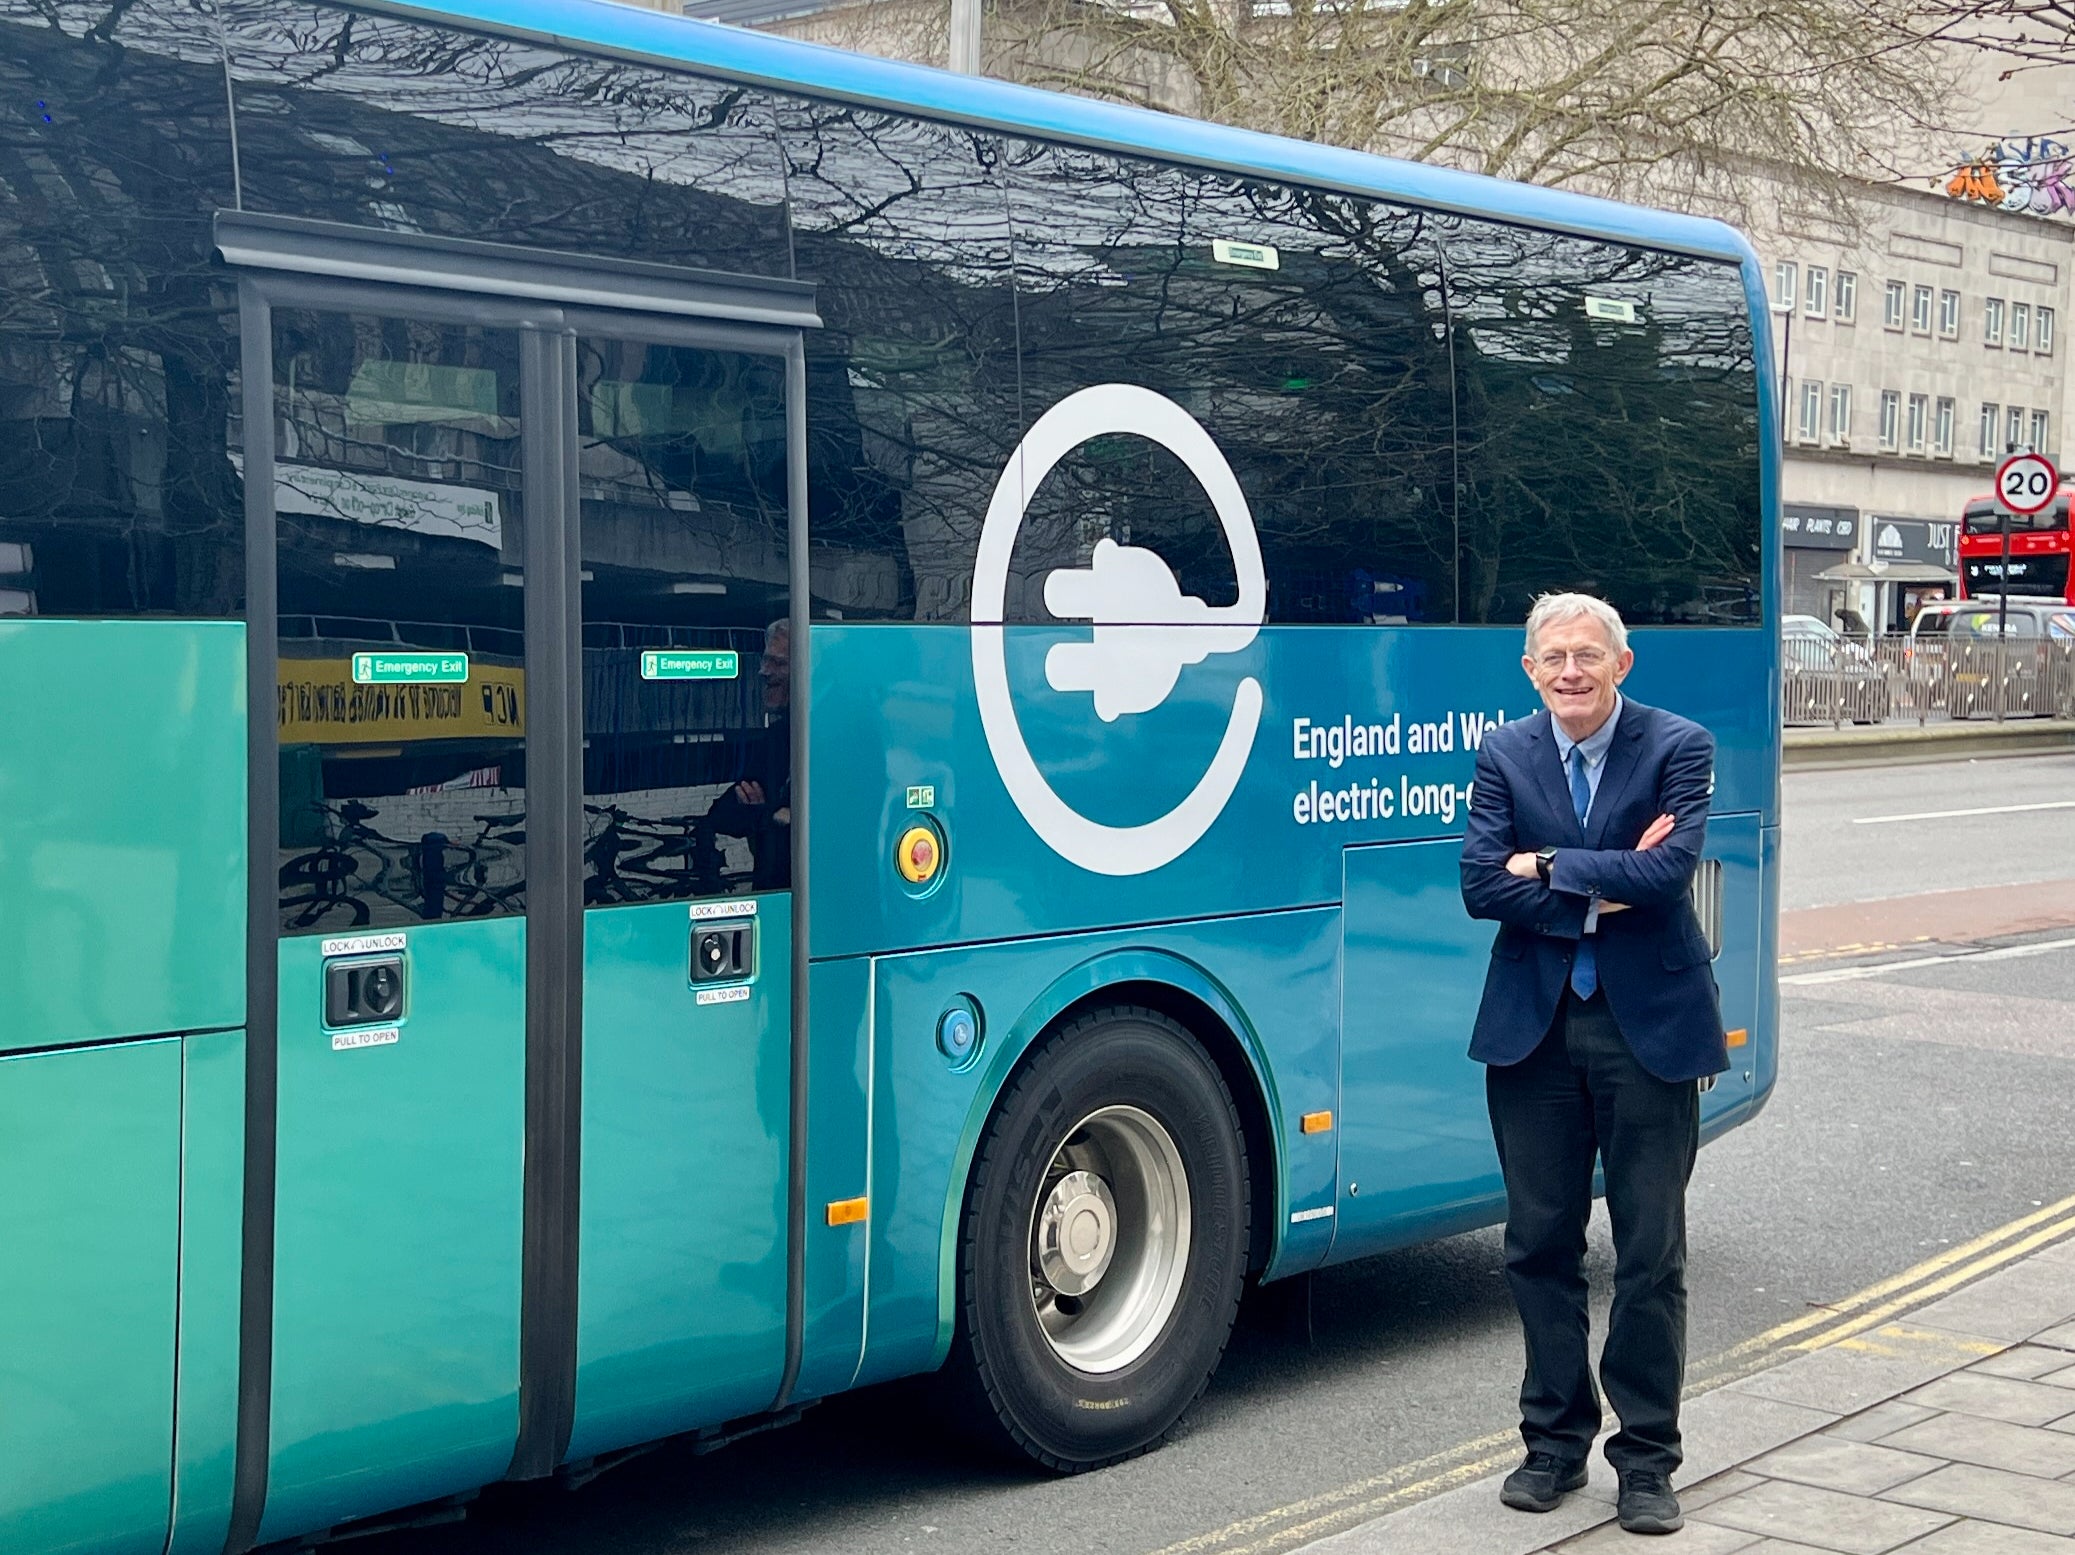 High energy: FlixBus electric coach, along with Simon Calder – thoughtfully wearing a matching tie